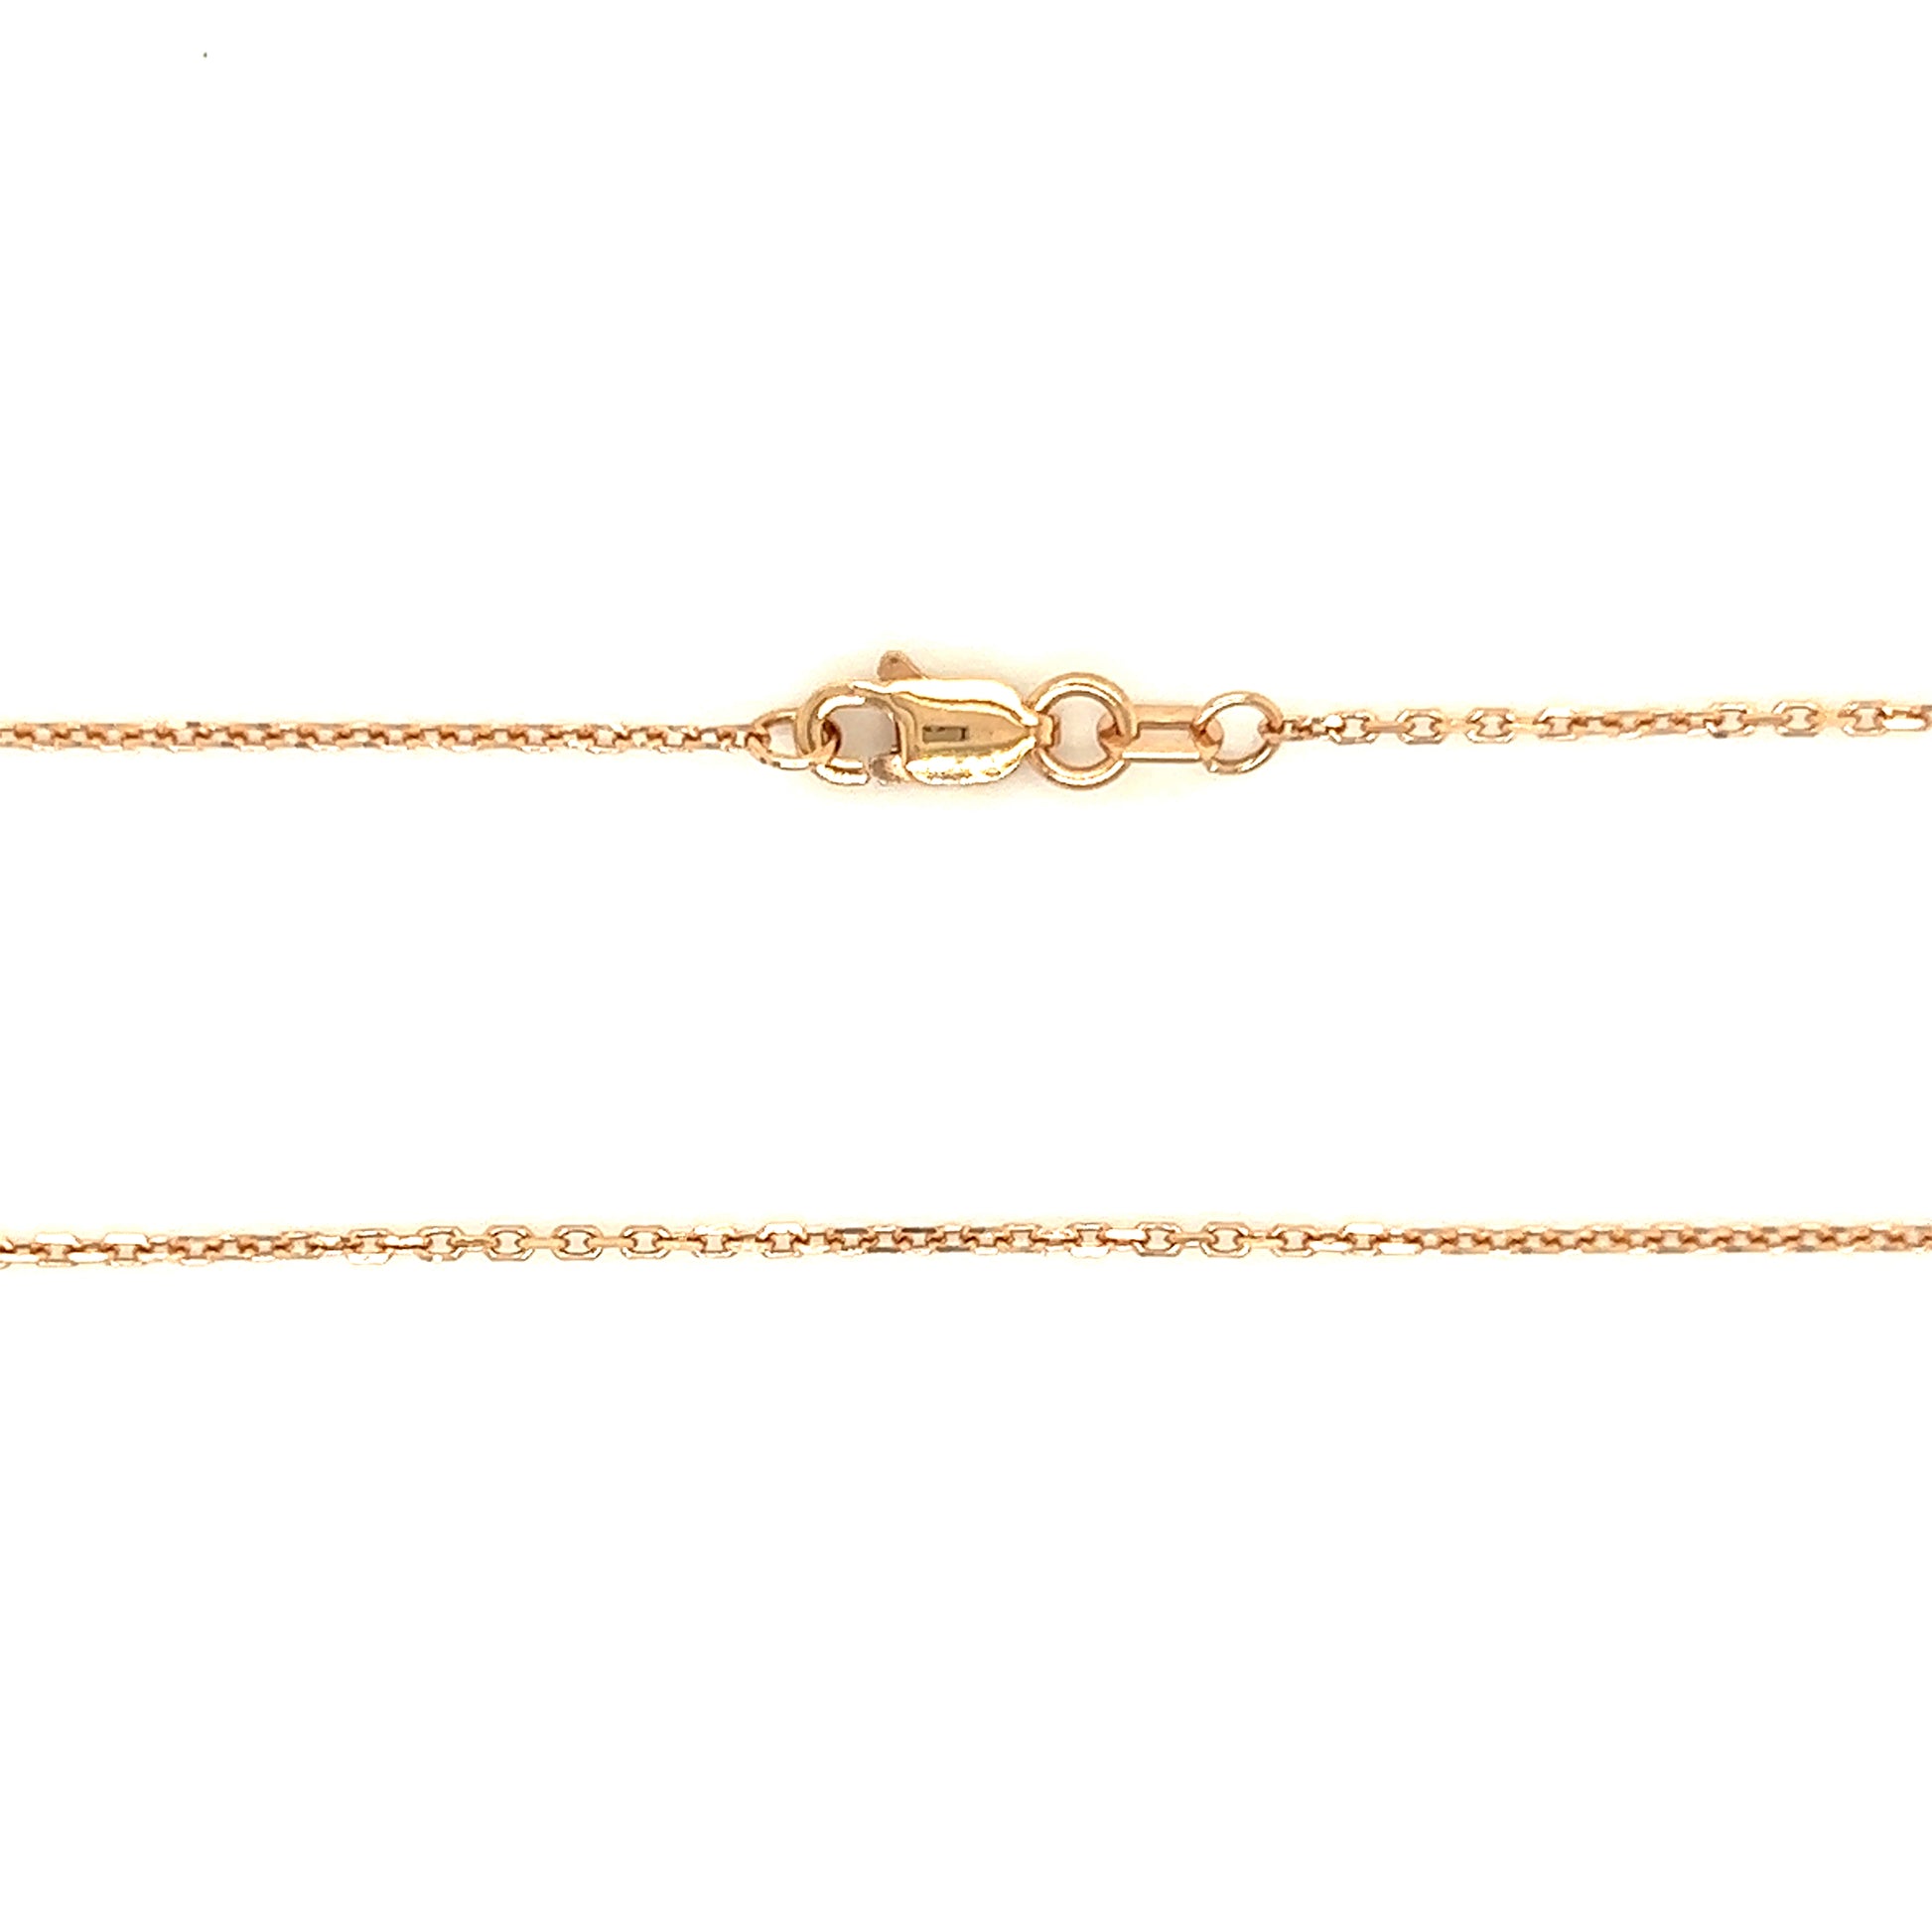 Cable Chain 1.15mm with 24in of Length in 14K Rose Gold Chain and Clasp View